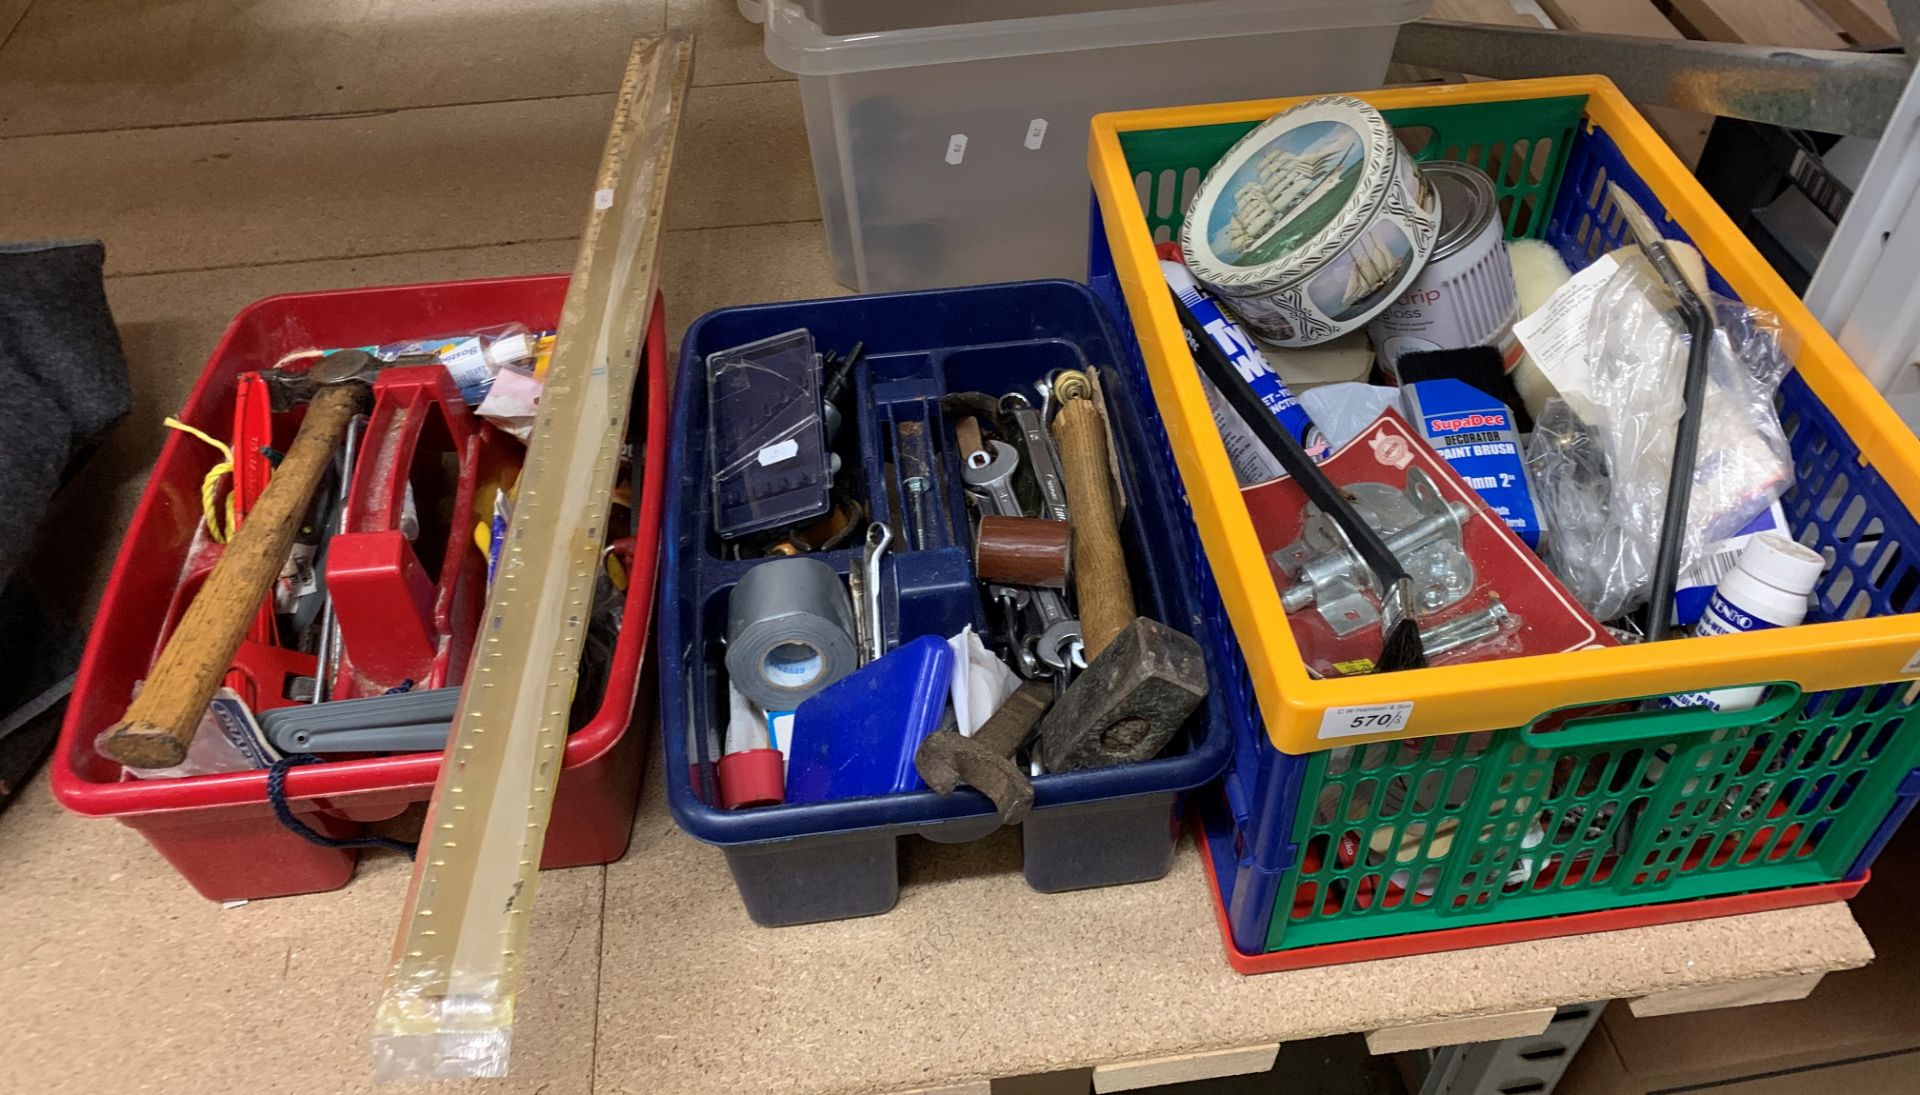 Contents to three plastic boxes and trays - assorted hand tols, paint brushes, consumables, etc.